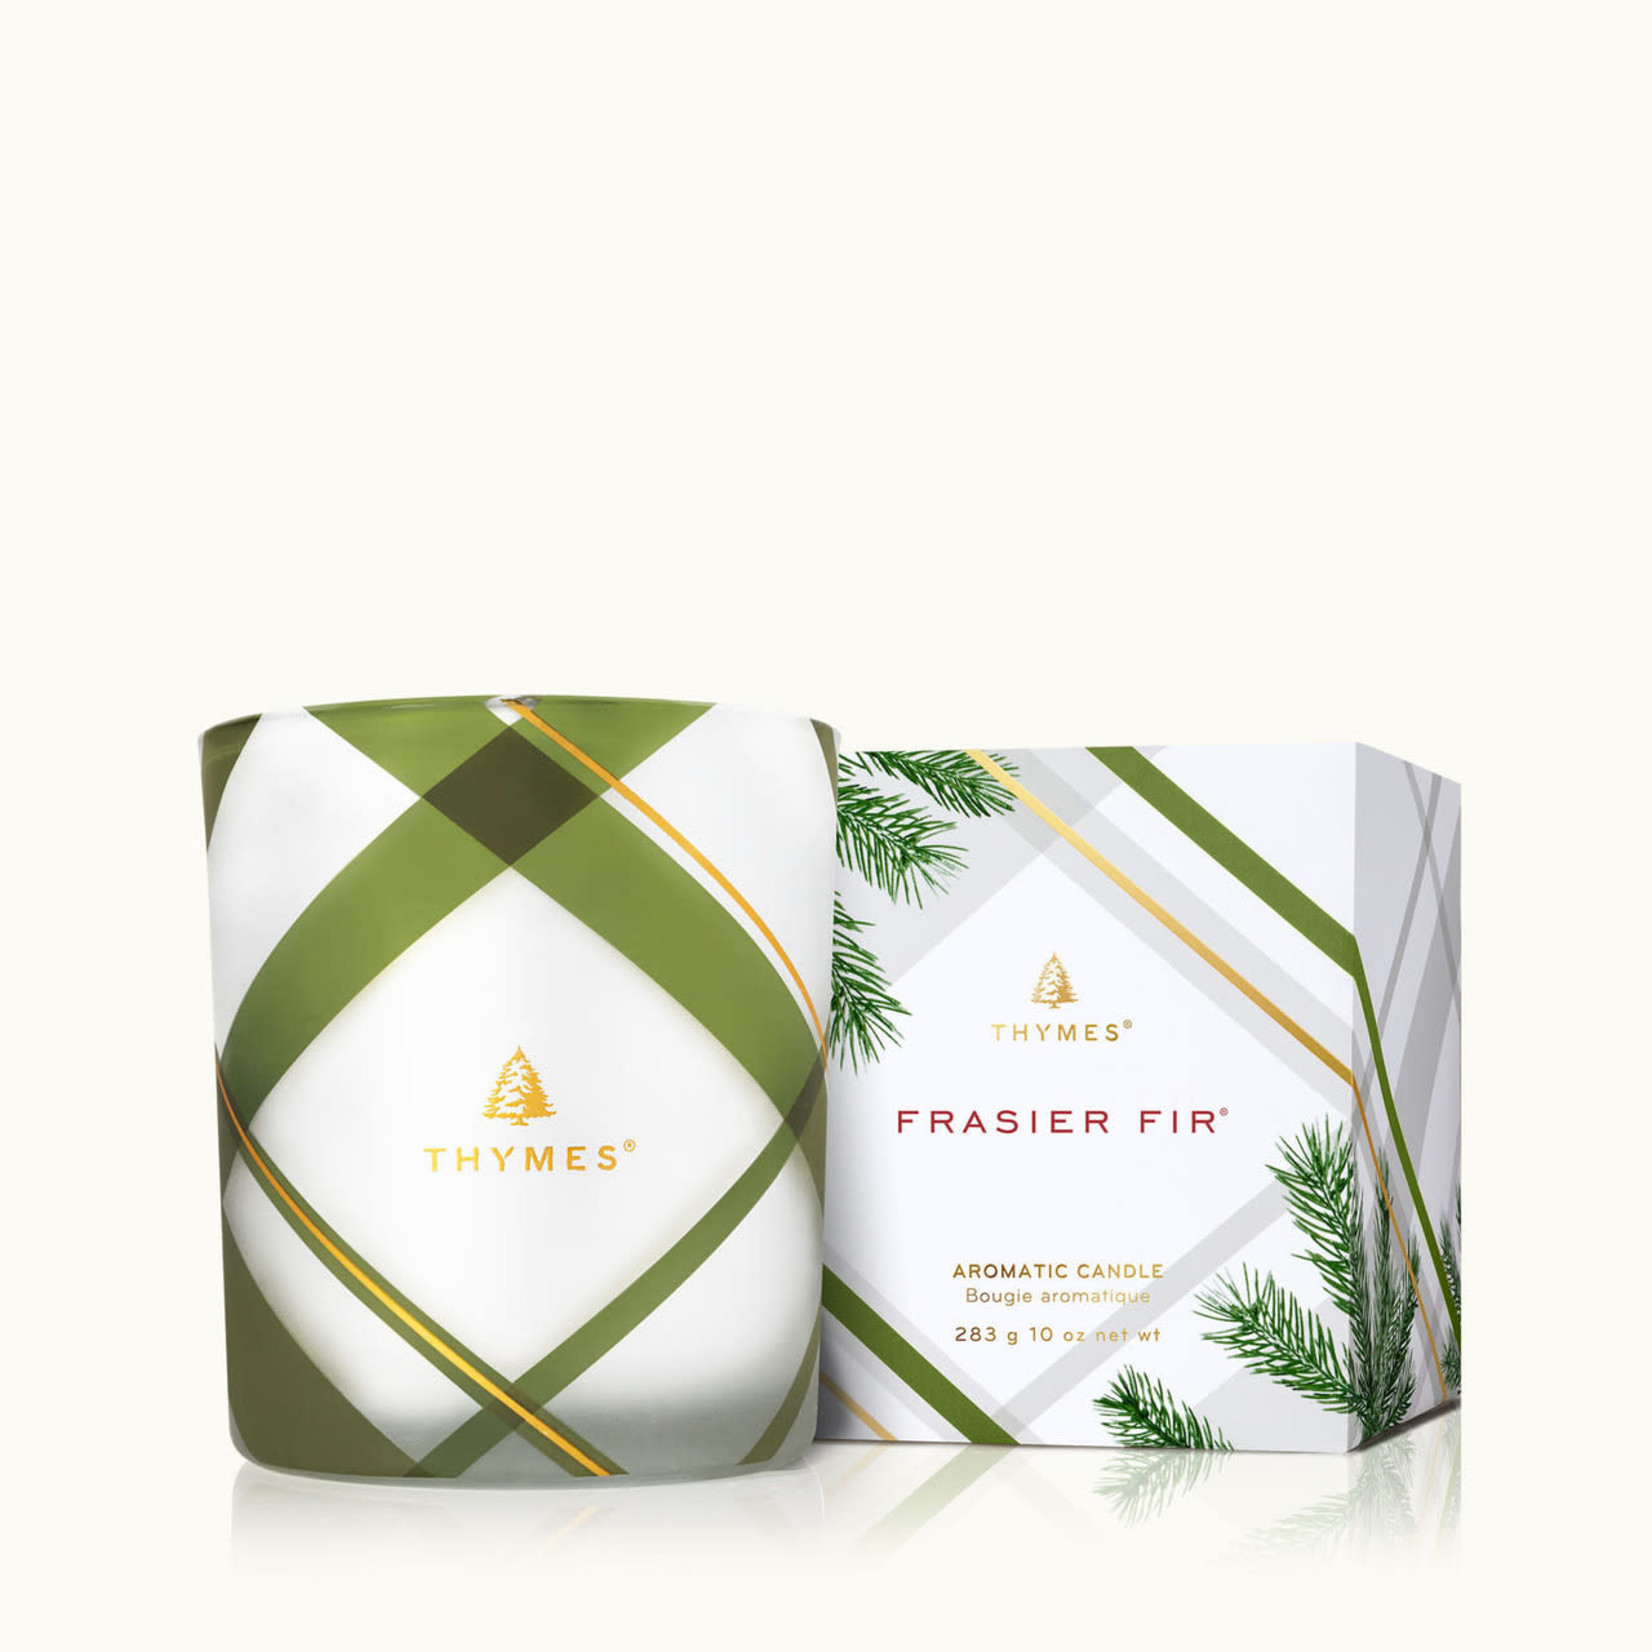 Thymes Thymes Frasier Fir Frosted Plaid Medium Candle